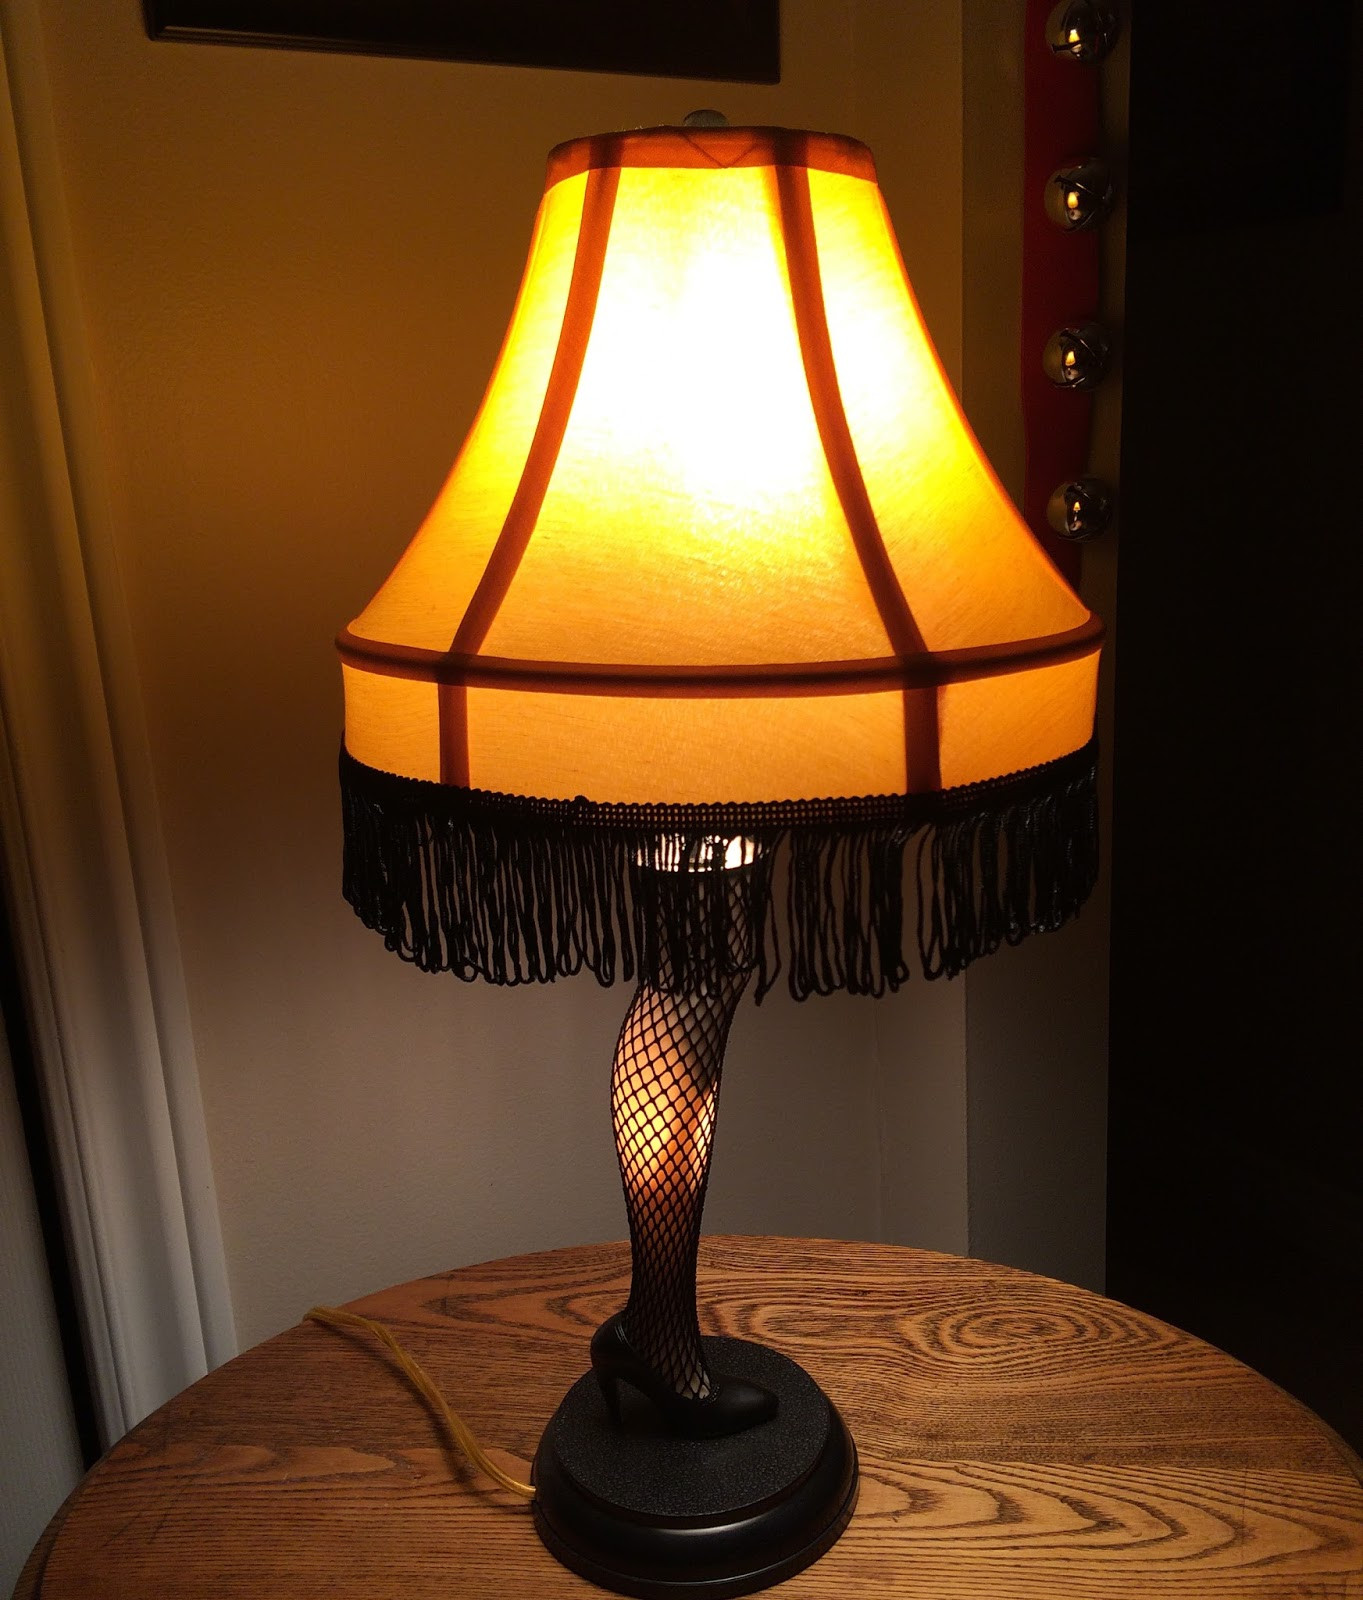 Christmas Movie With Leg Lamp
 A Little Bit of Everything A Christmas Story & The Leg Lamp